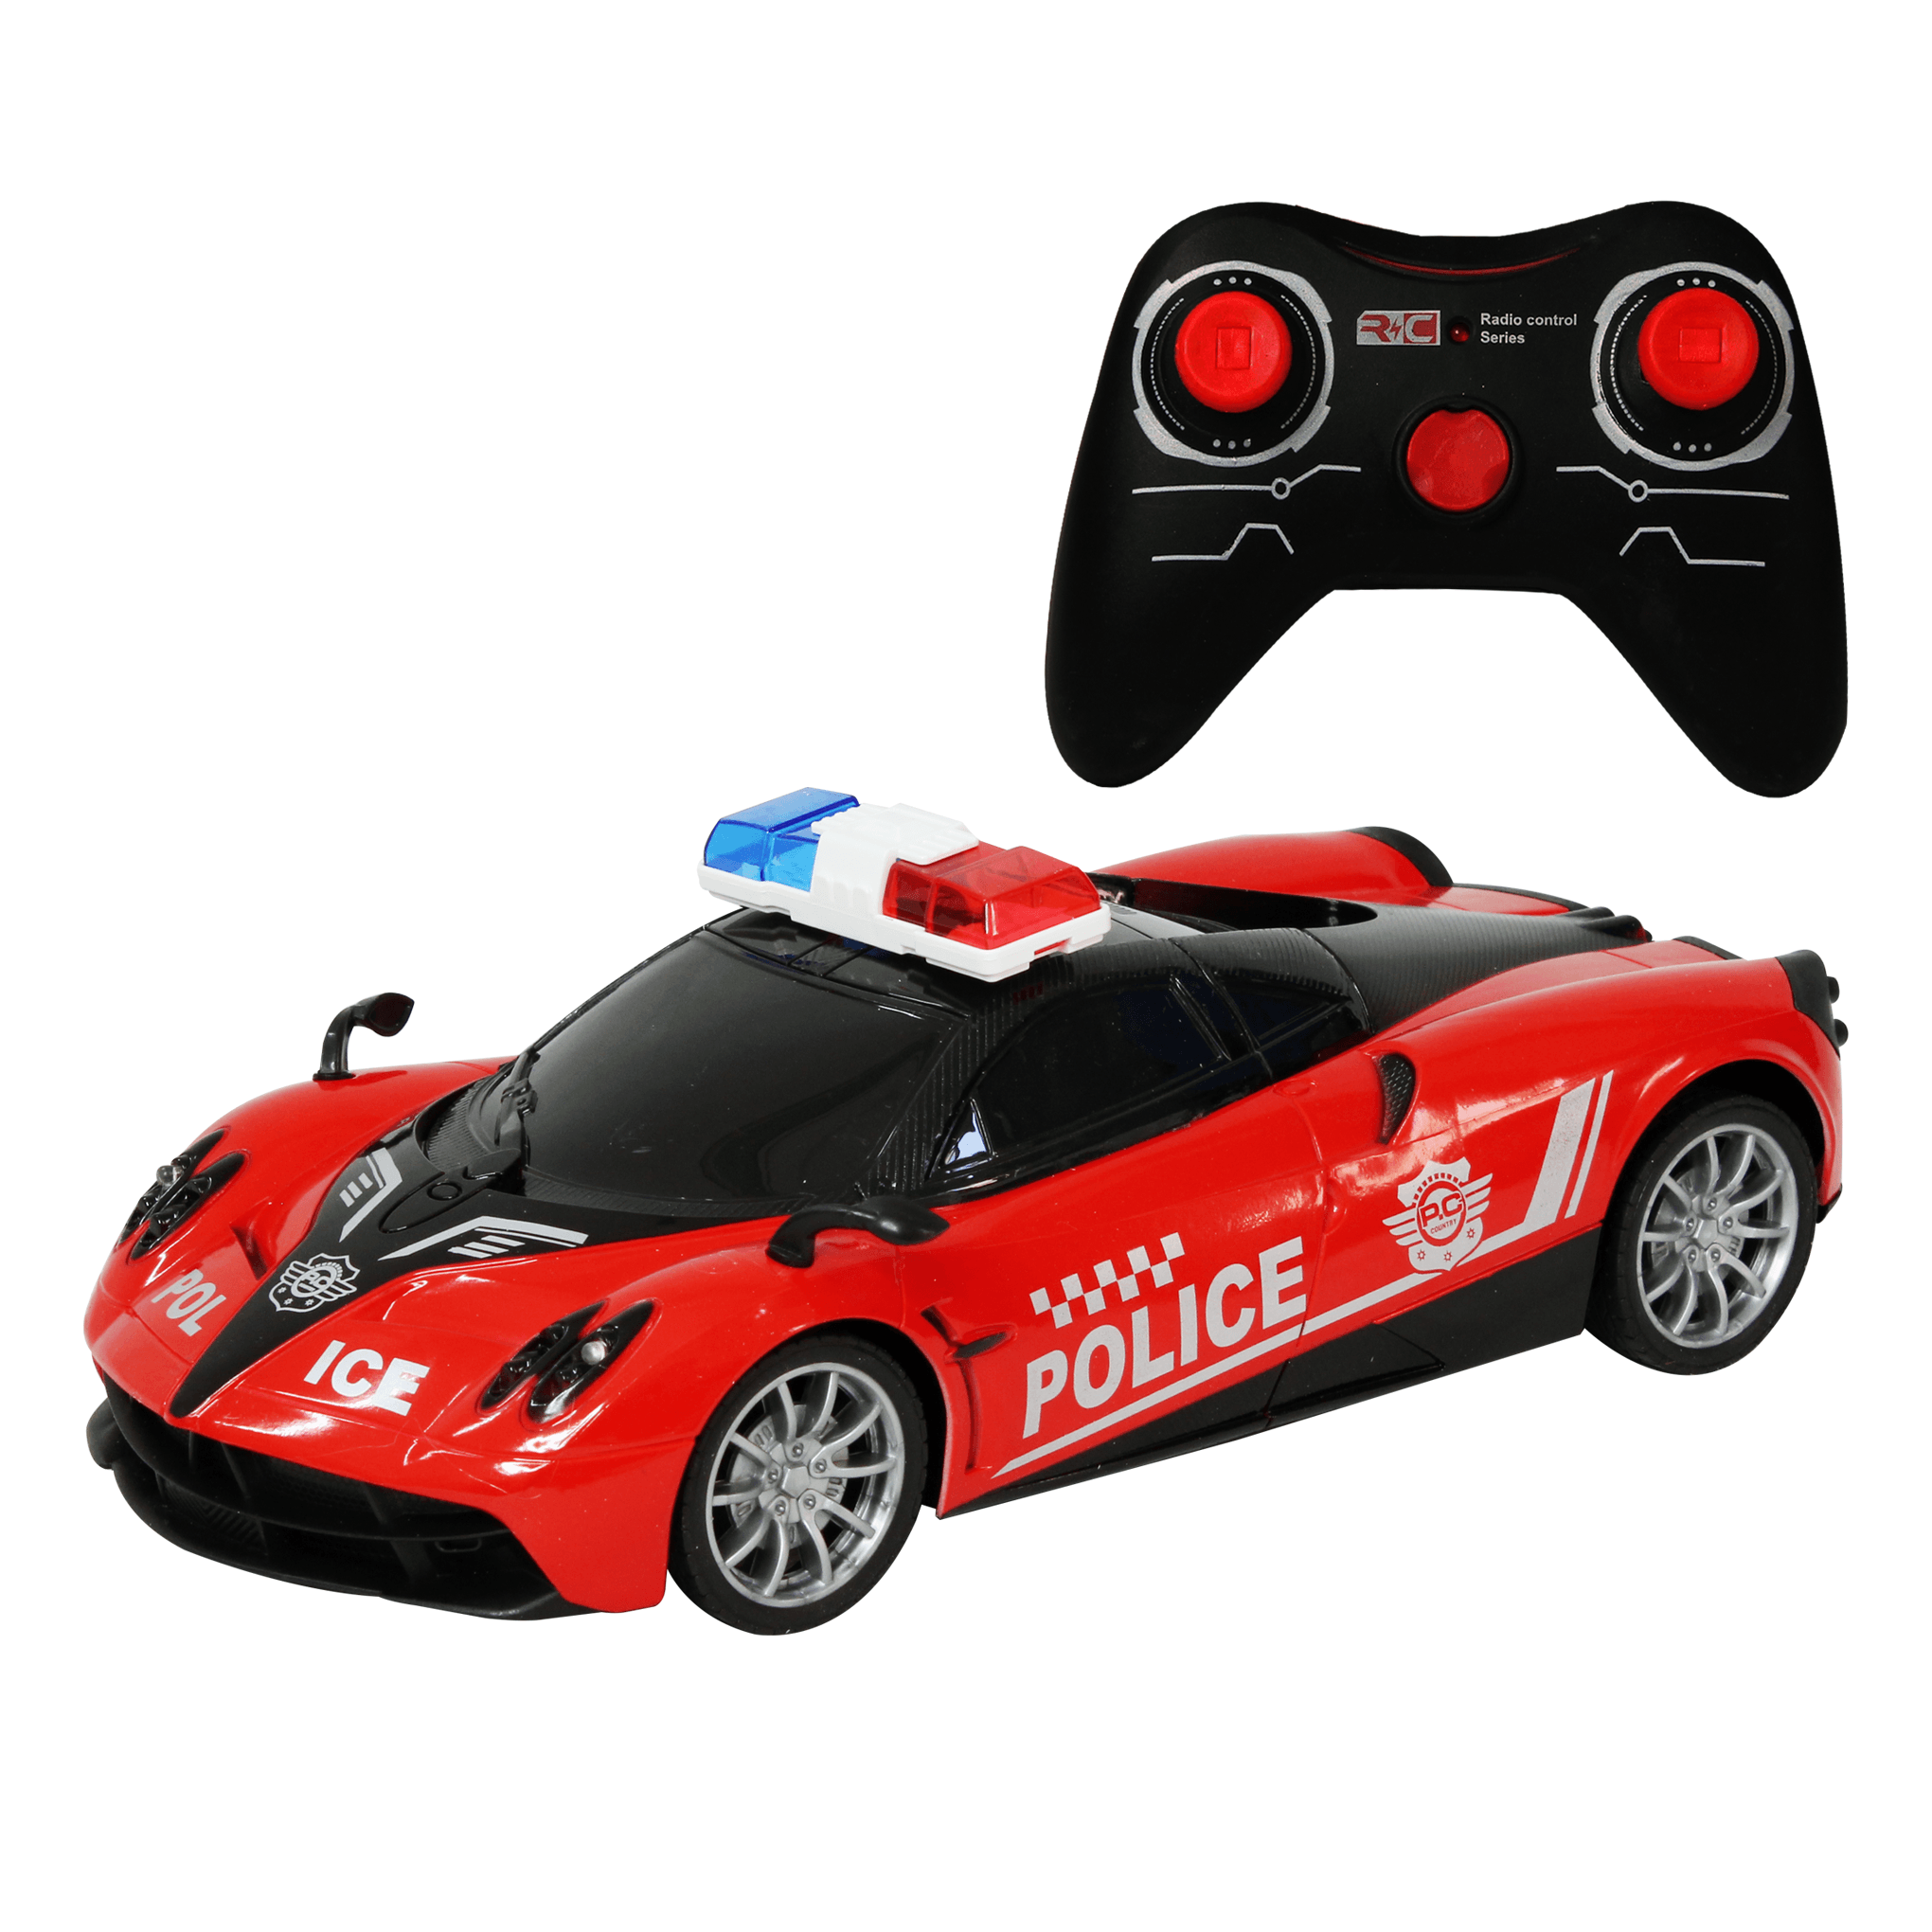 Police sports car toy with radio control and lights - BumbleToys - 2-4 Years, 5-7 Years, Boys, Carrier Truck, Cars, Toy Land, Truck